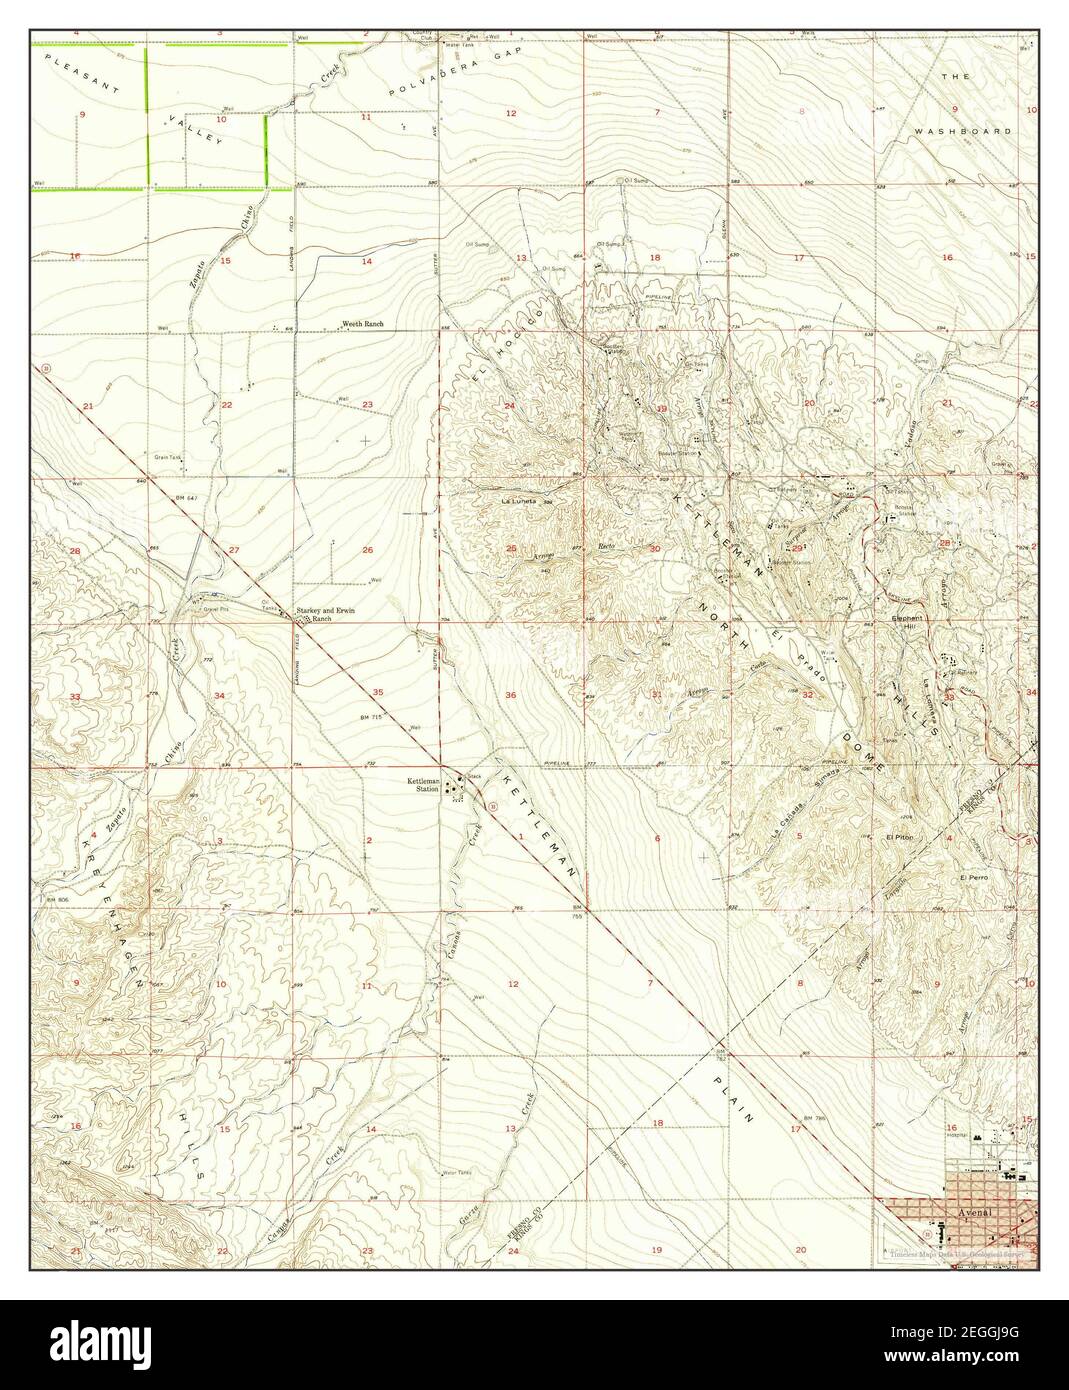 Avenal, California, map 1954, 1:24000, United States of America by Timeless Maps, data U.S. Geological Survey Stock Photo